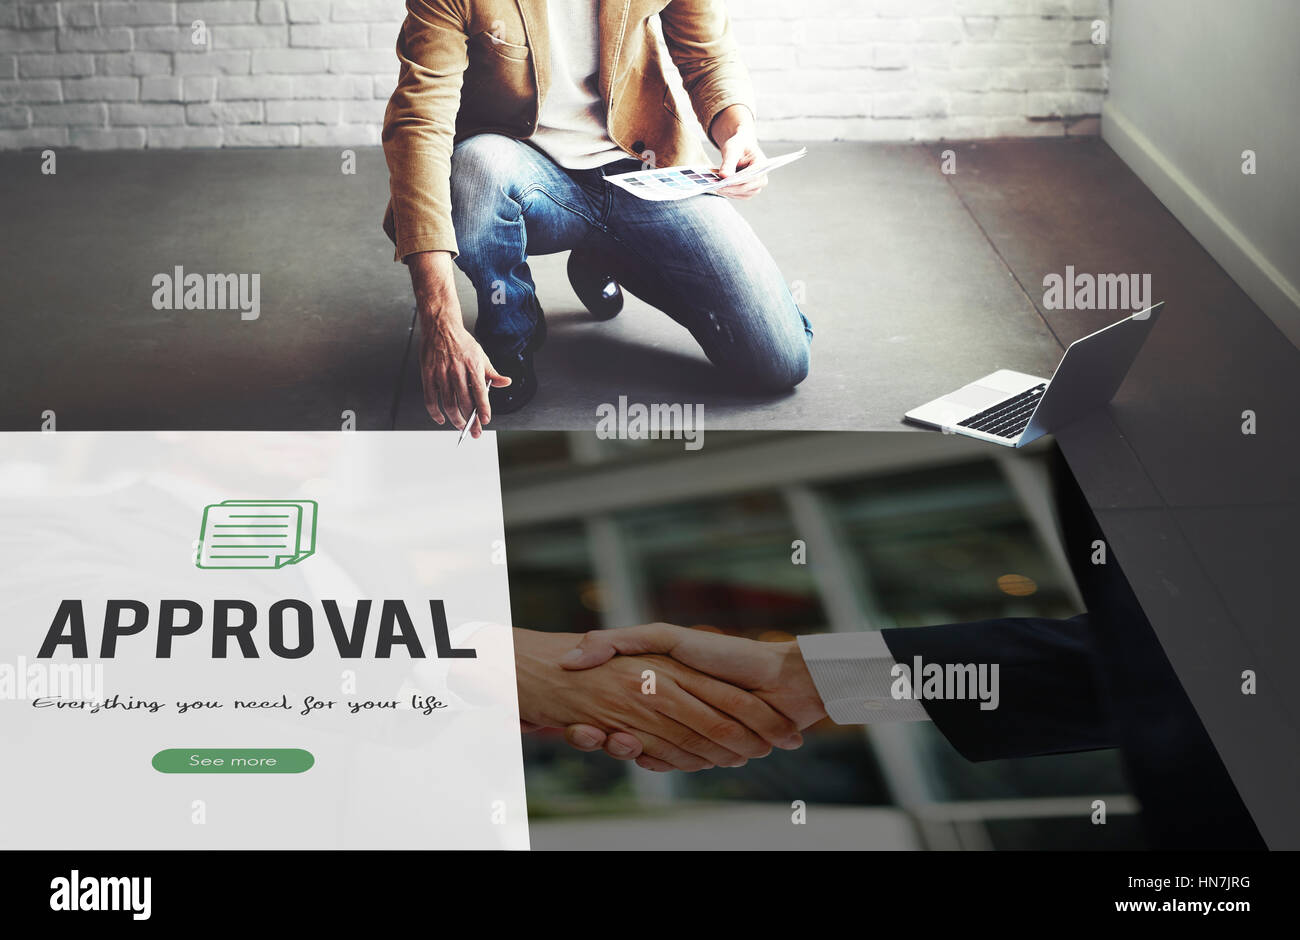 Approval word on business handshake background Stock Photo